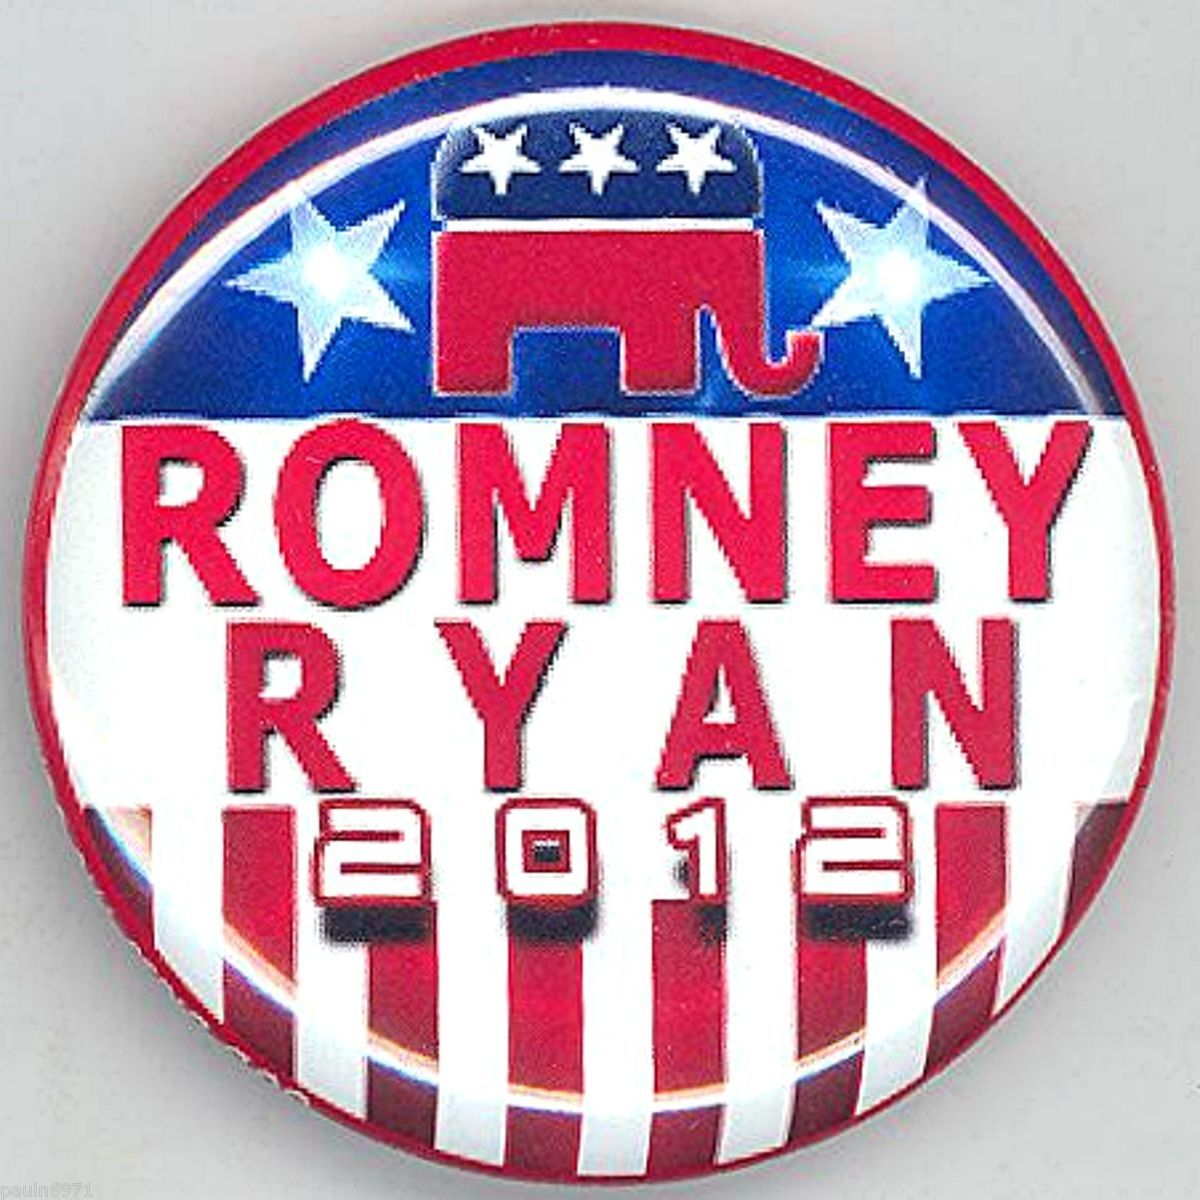 2012 Outstanding ROMNEY RYAN 2012 Campaign Button